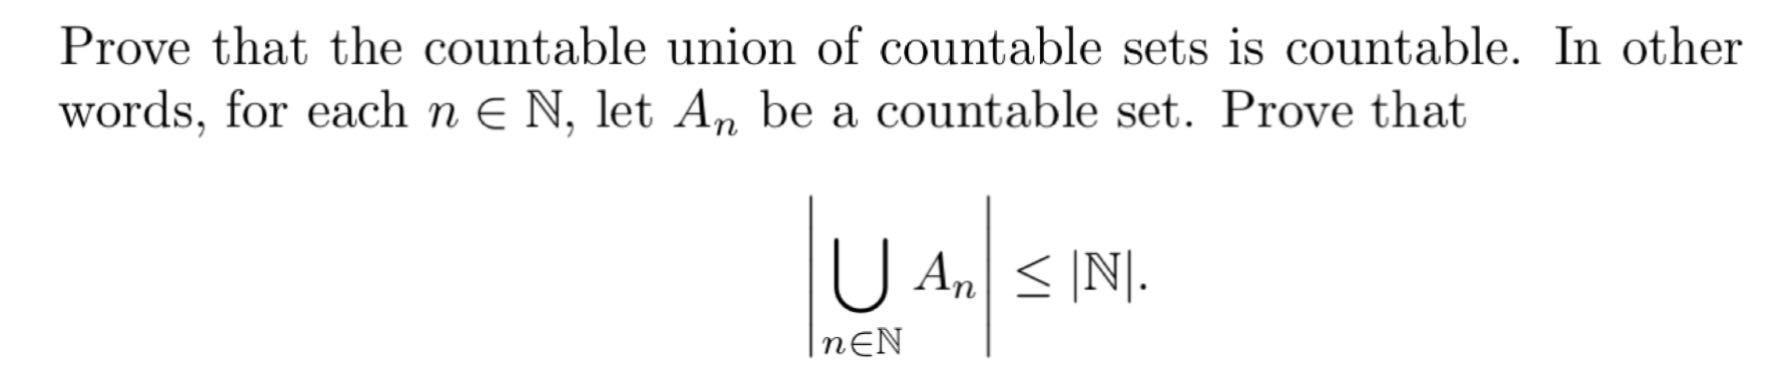 Prove that the countable union of countable sets is countable. In other words, for each n E N, let An be a